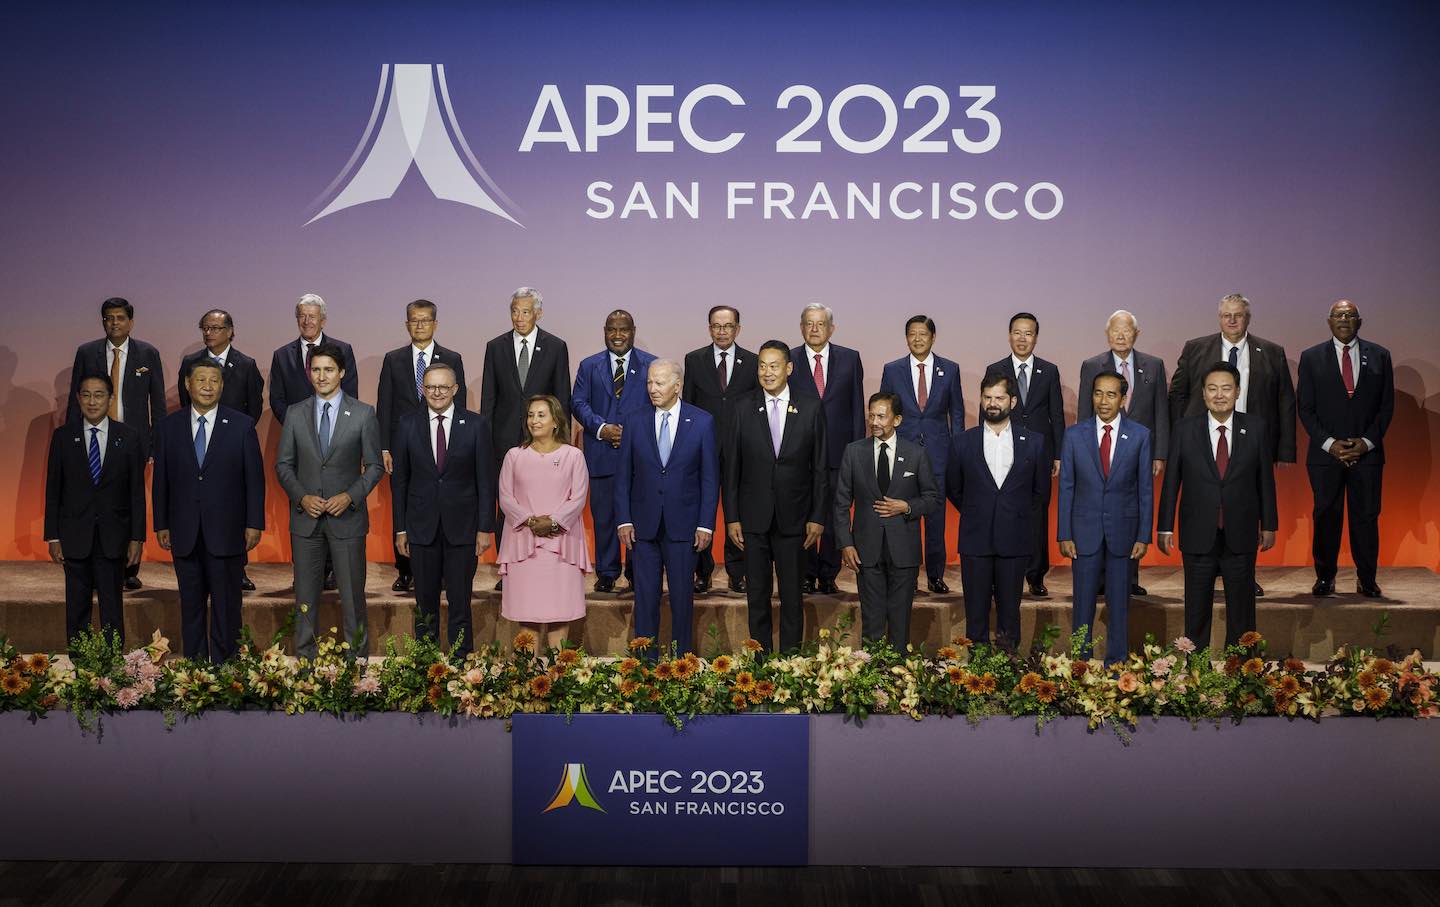 Leaders Group Photo At The Asia-Pacific Economic Cooperation Summit